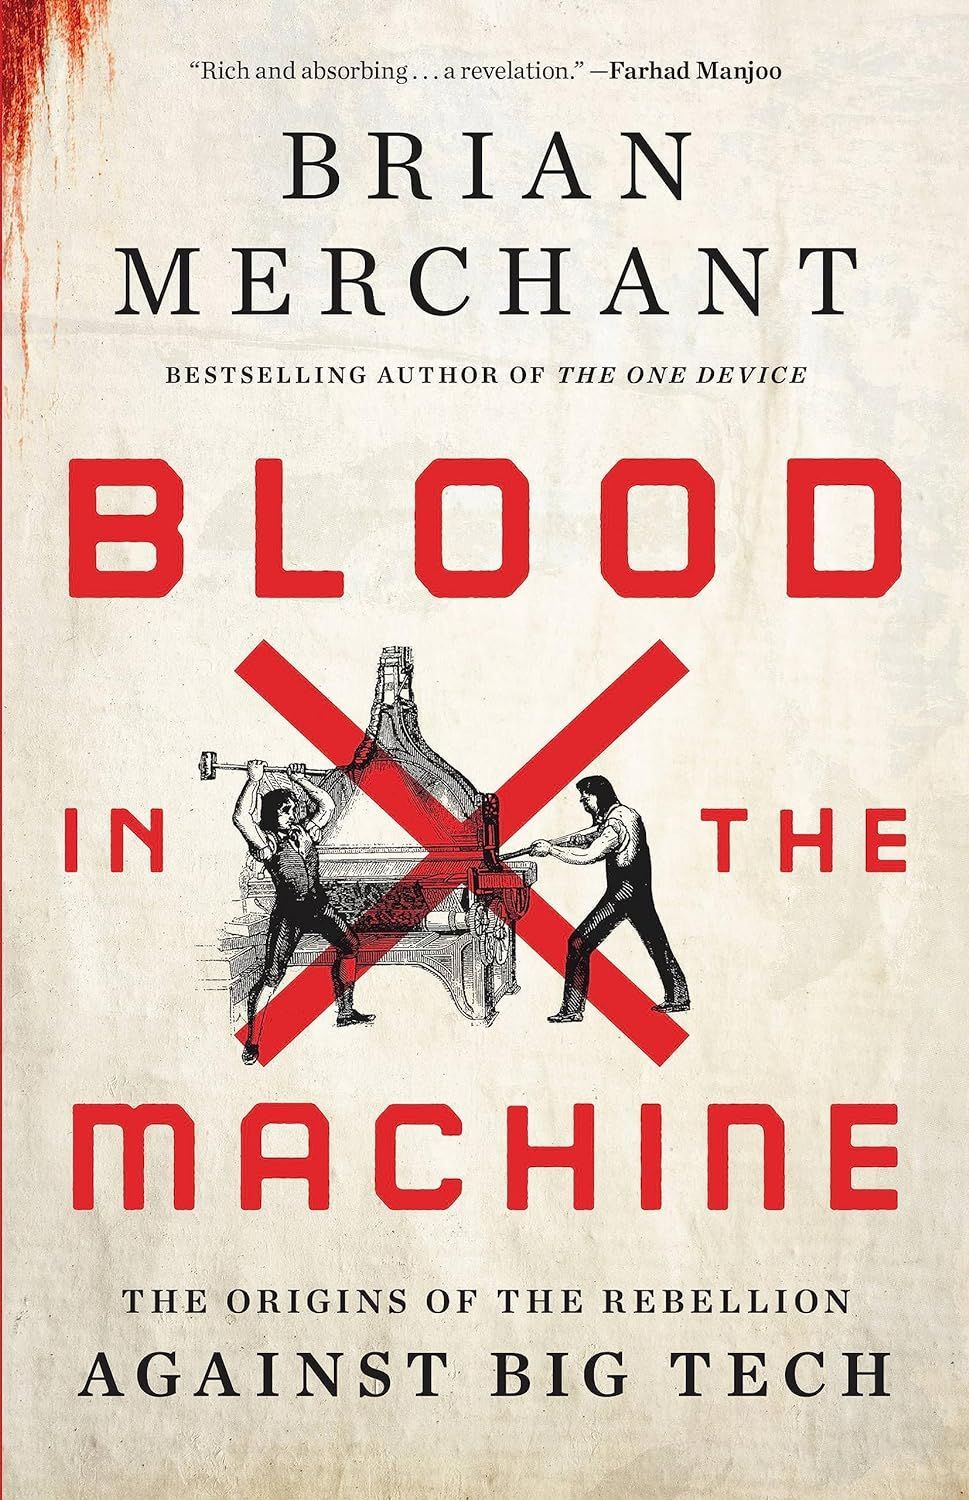 Inspiration from the Luddites: On Brian Merchant’s “Blood in the Machine”